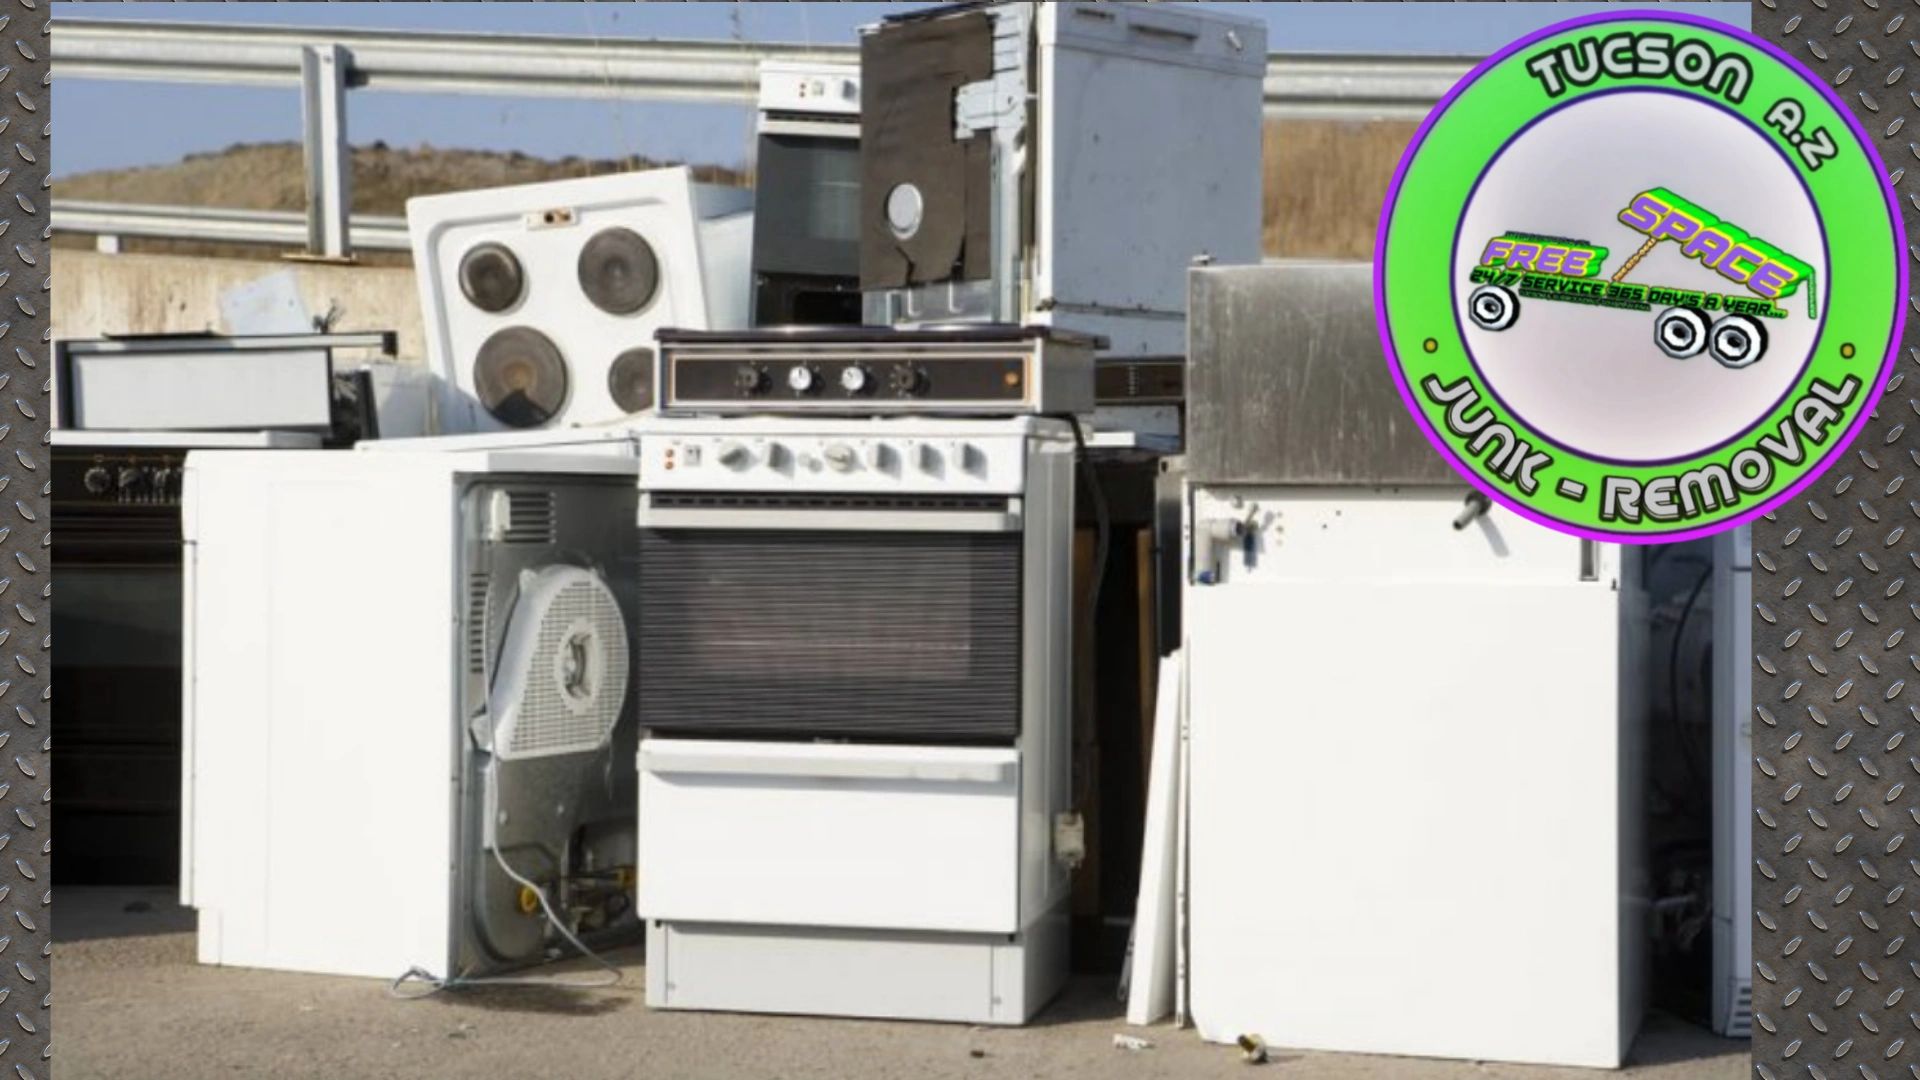 Appliance removal in tucson and surrounding areas 24 hr service.